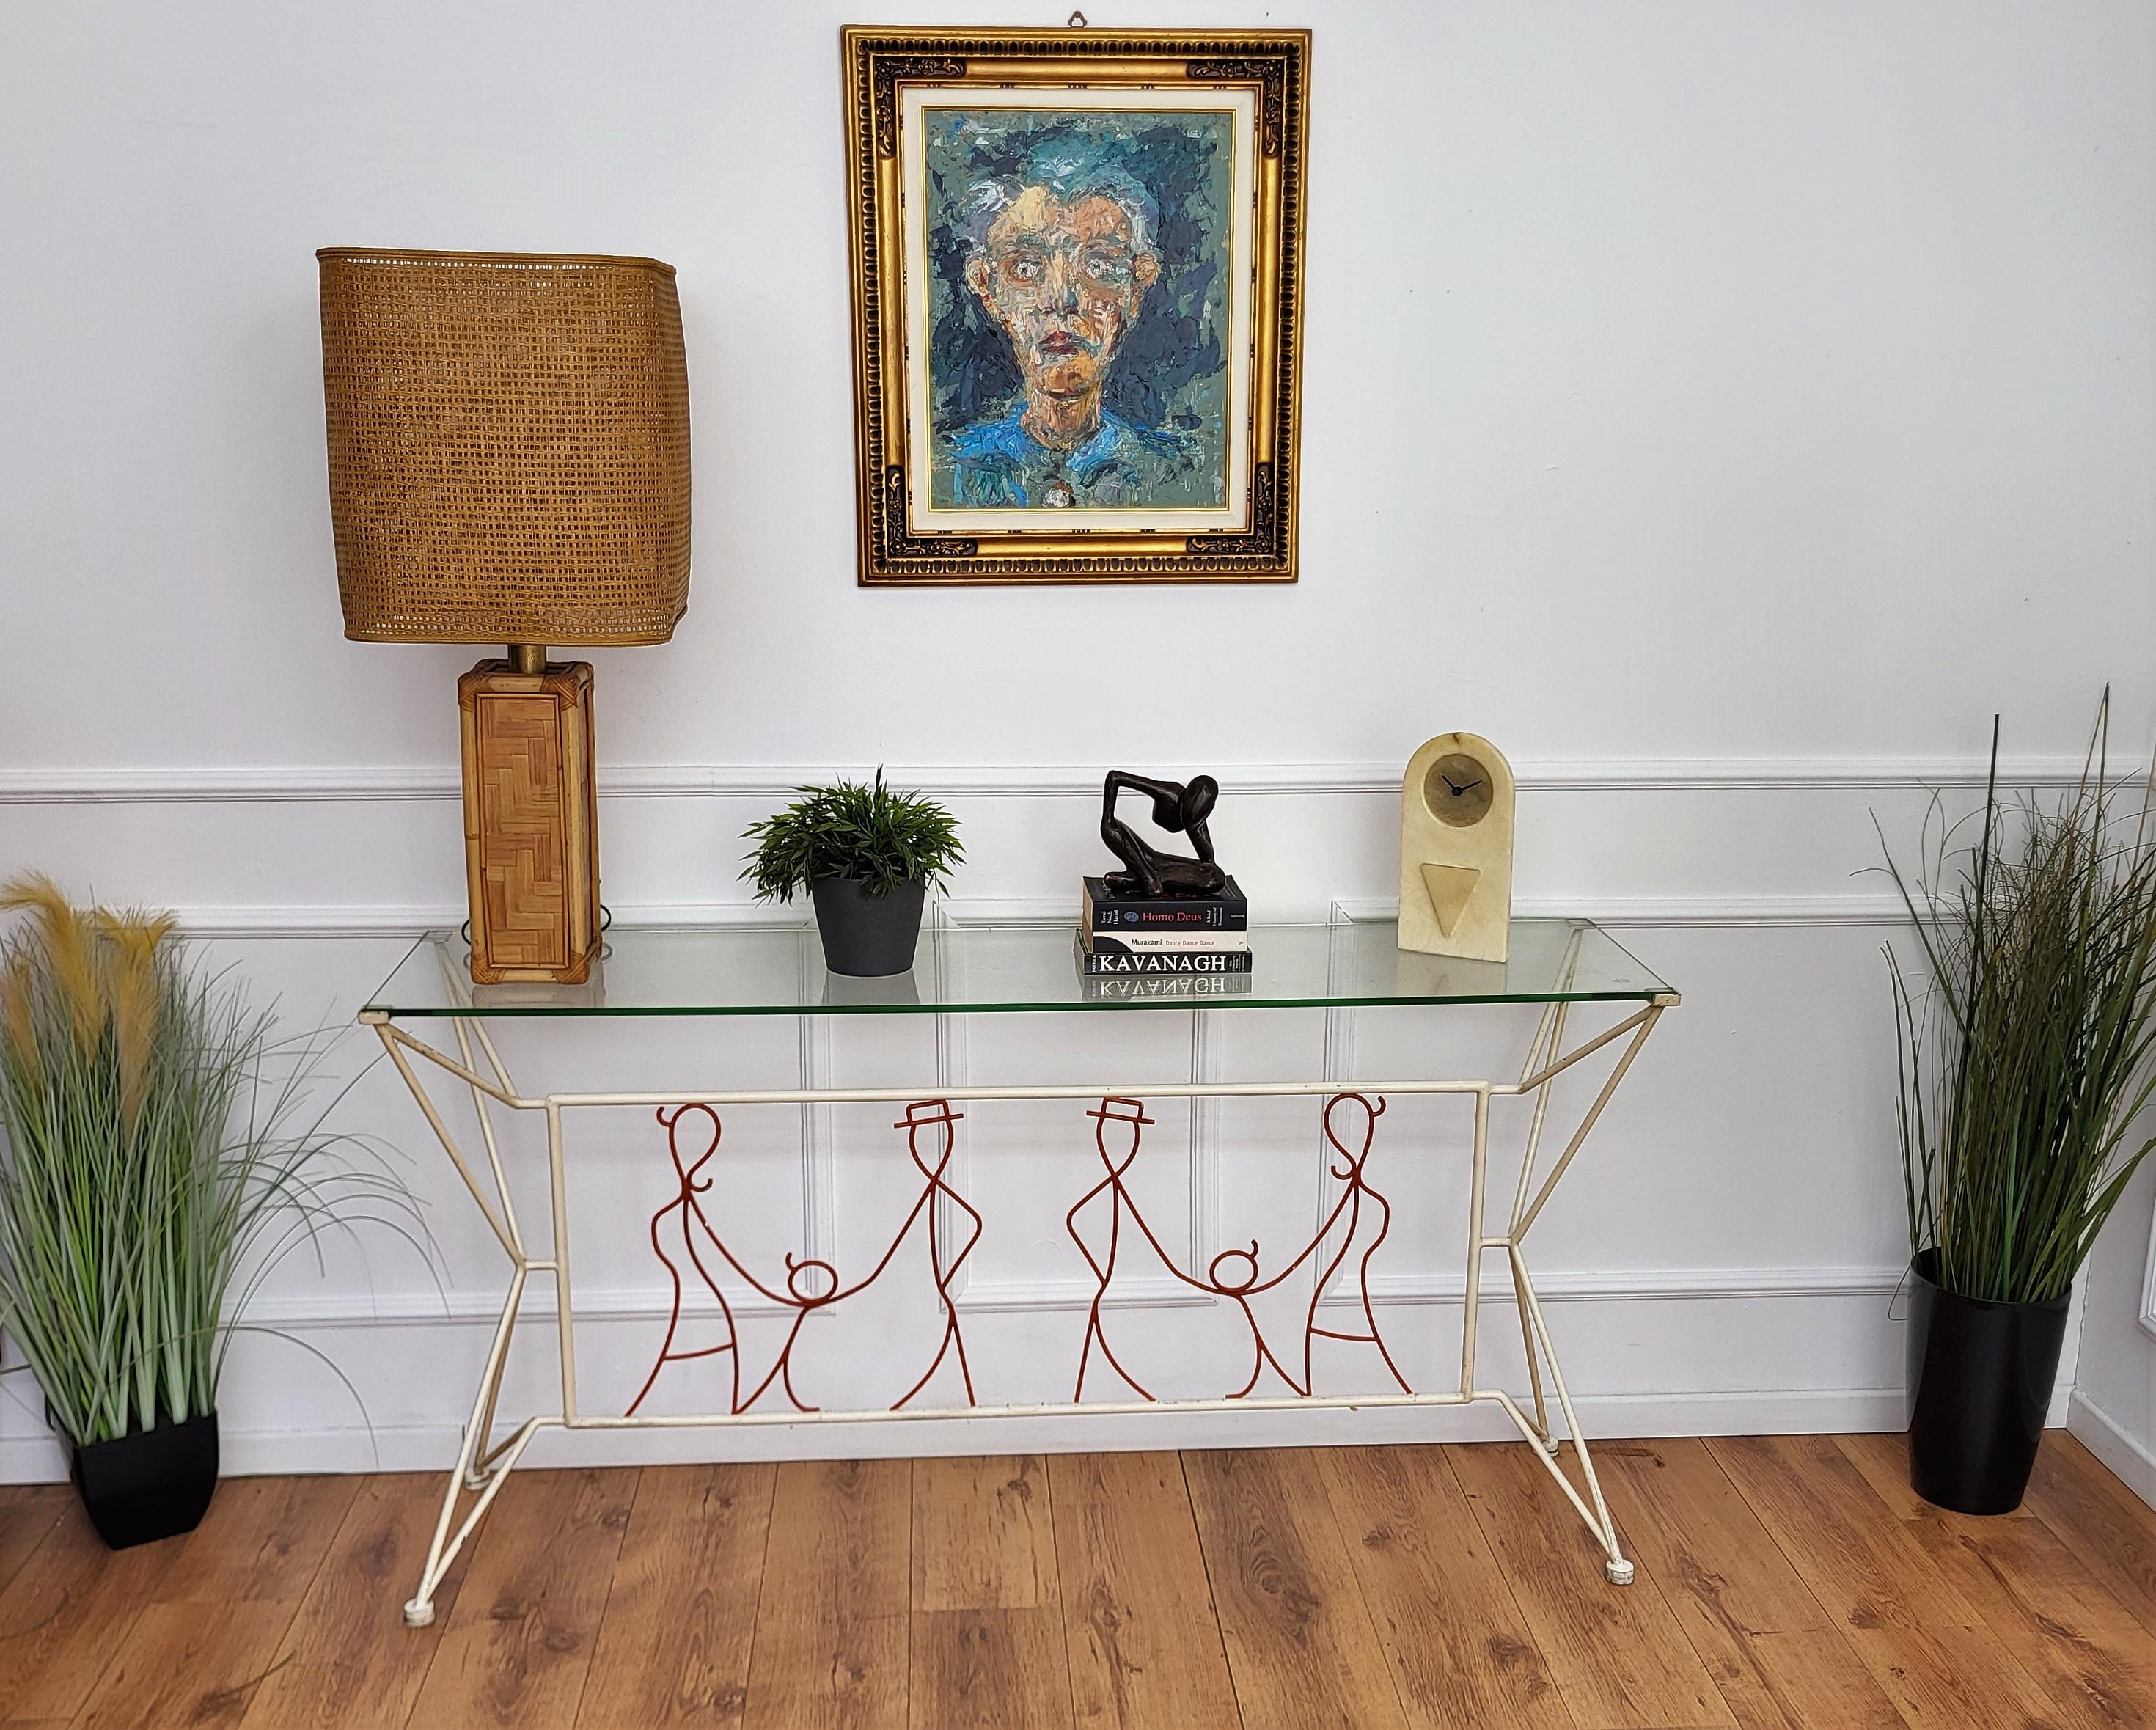 A stunning handcrafted Italian iron painted console table with a hand-wrought iron base where we have a red painted linear central stylized family portrait with a female, child and male figures holding each-other framed inside a white/cream painted